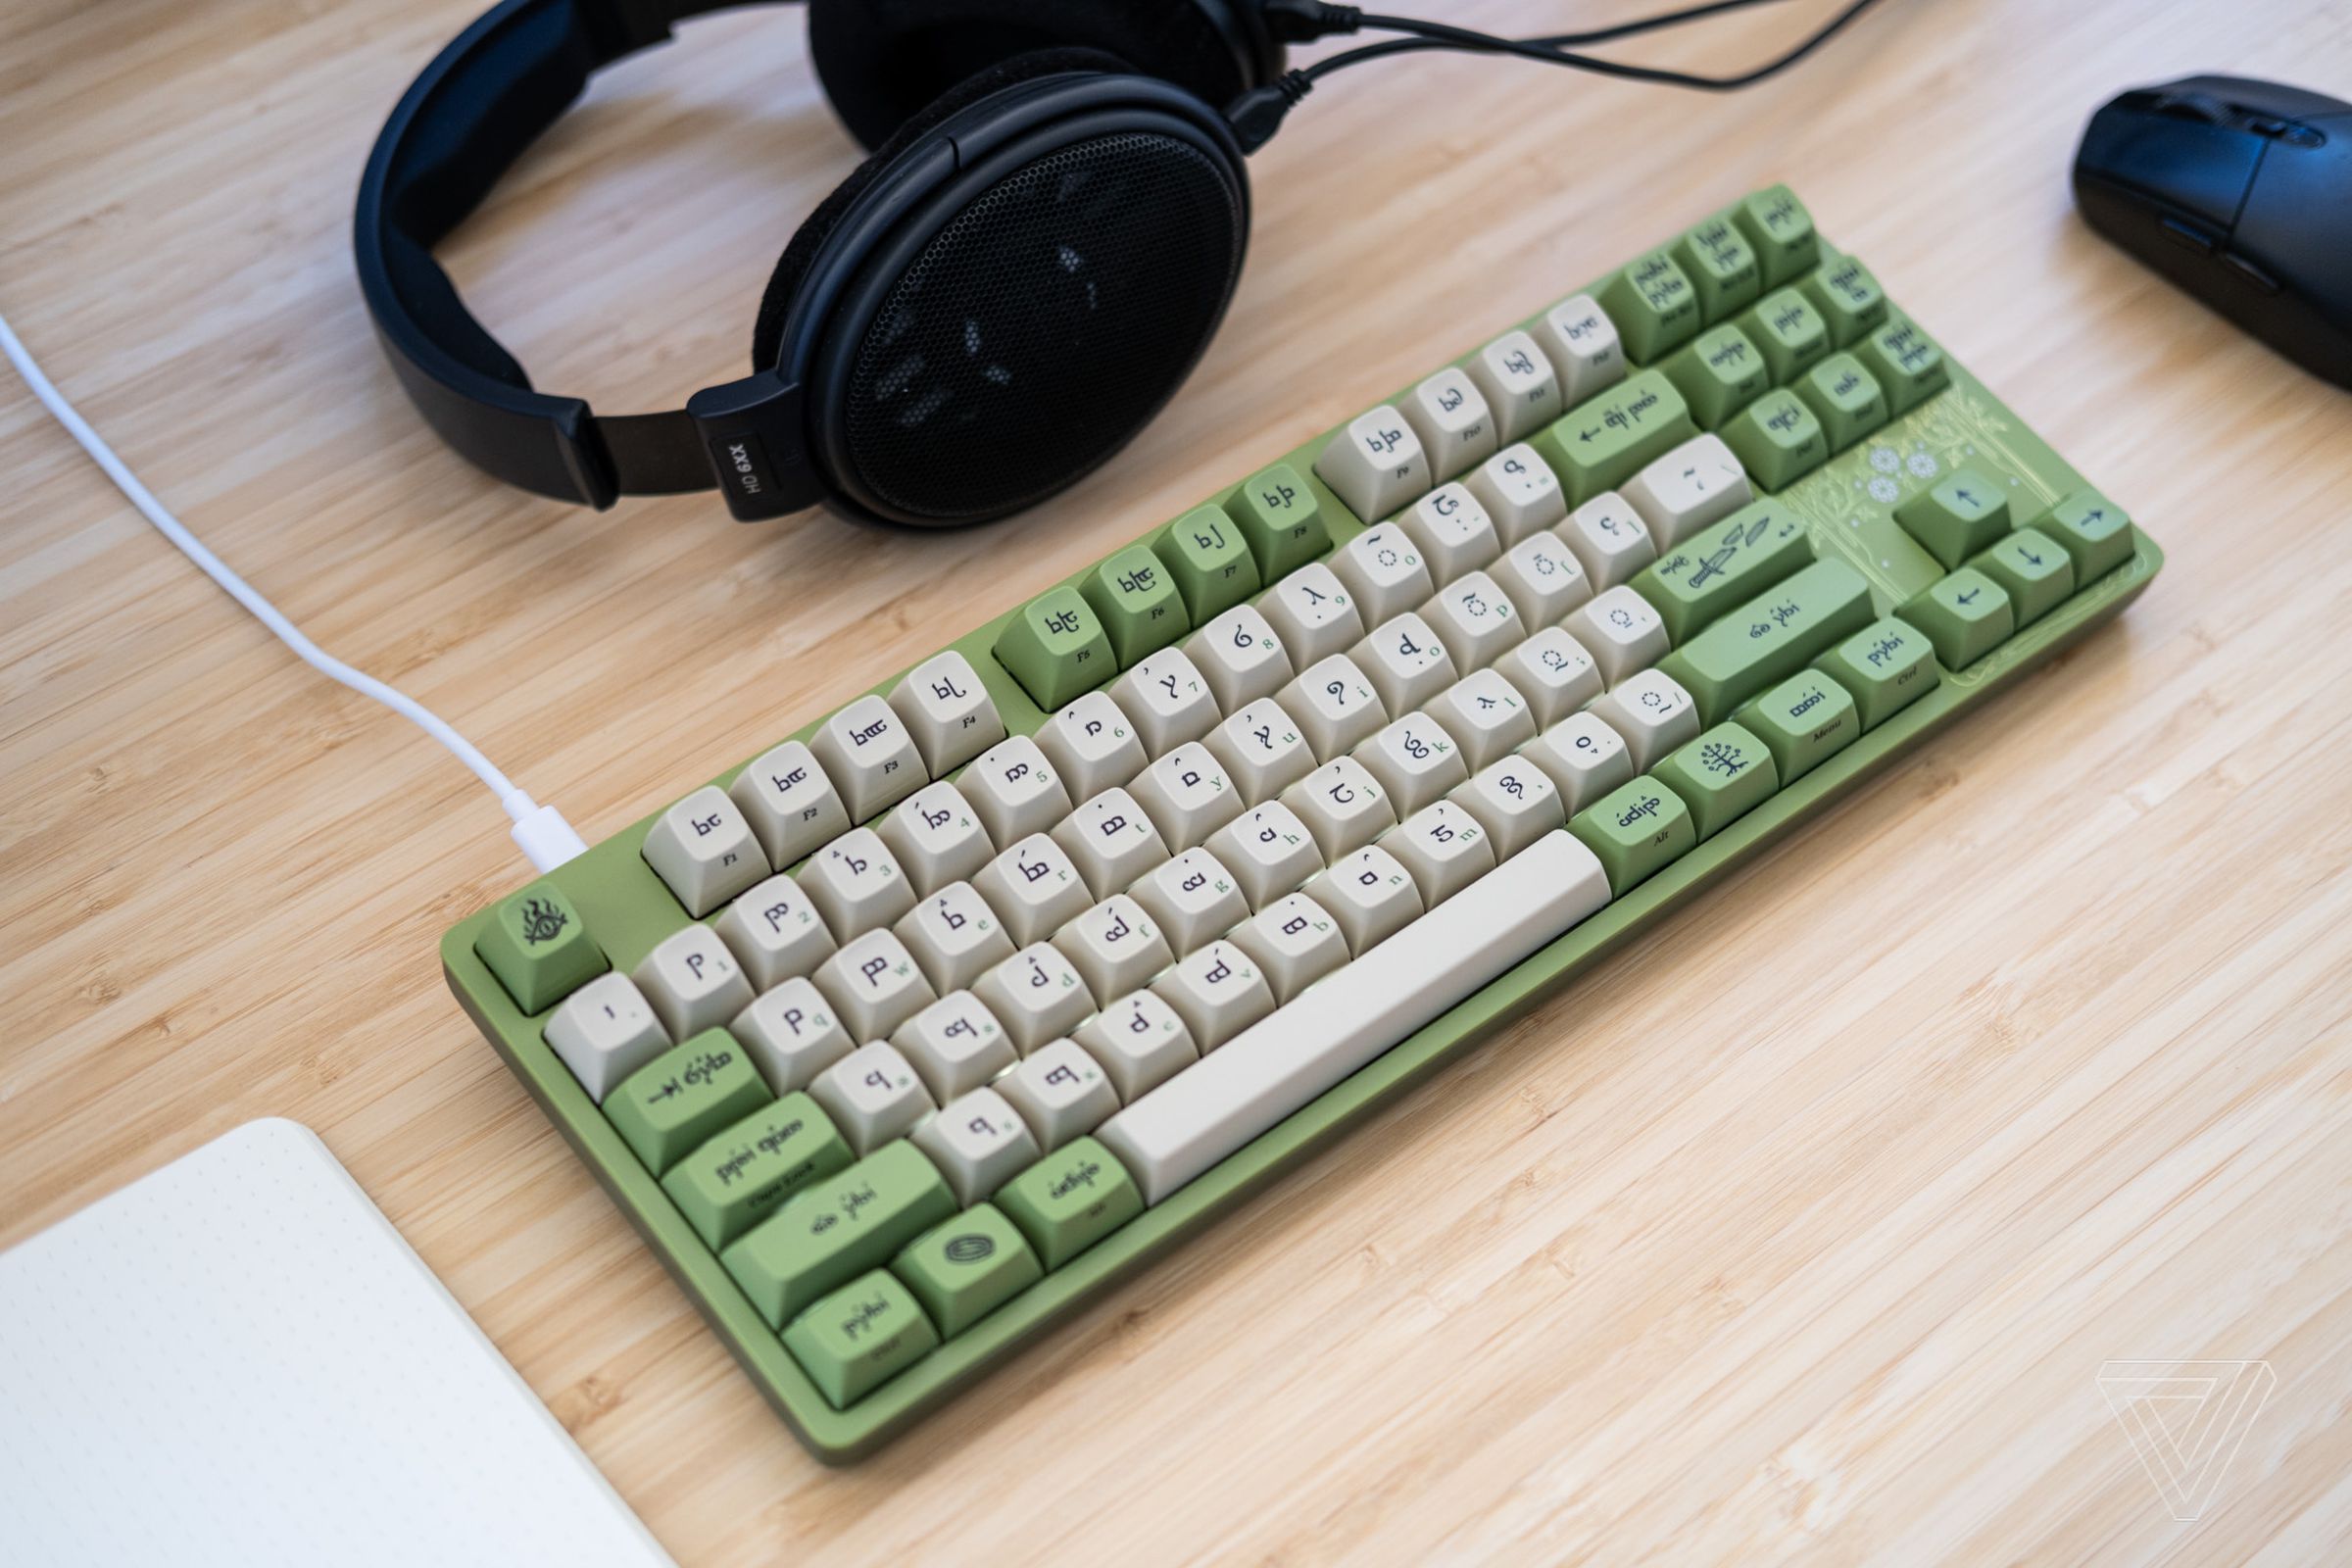 The Elvish version comes with green and off-white keycaps.